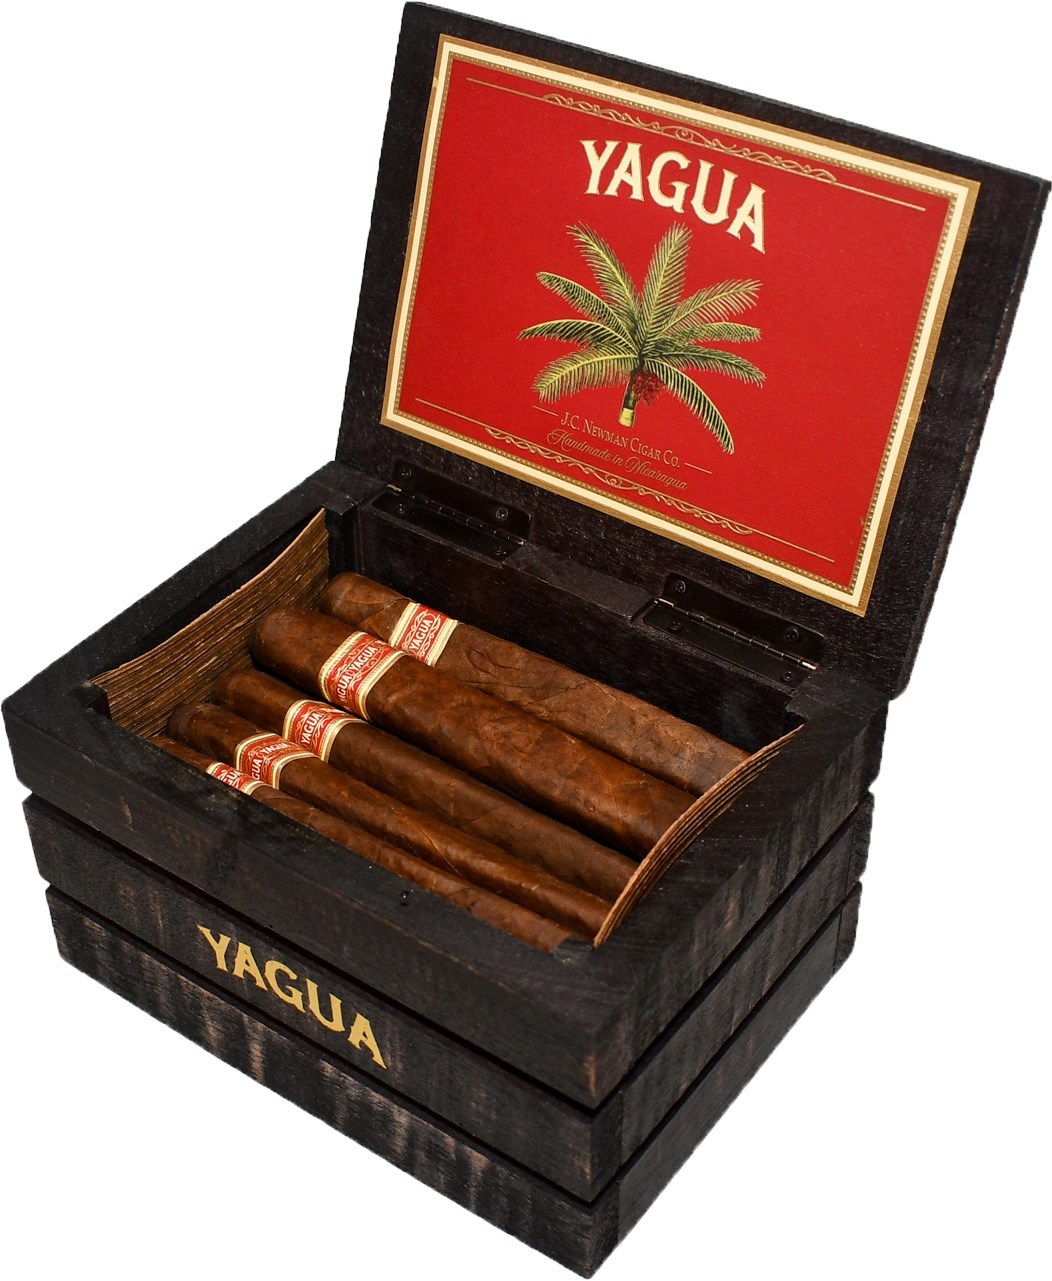 Buy Yagua Online At Small Batch Cigar Best Online Cigar Shopping Experience Around